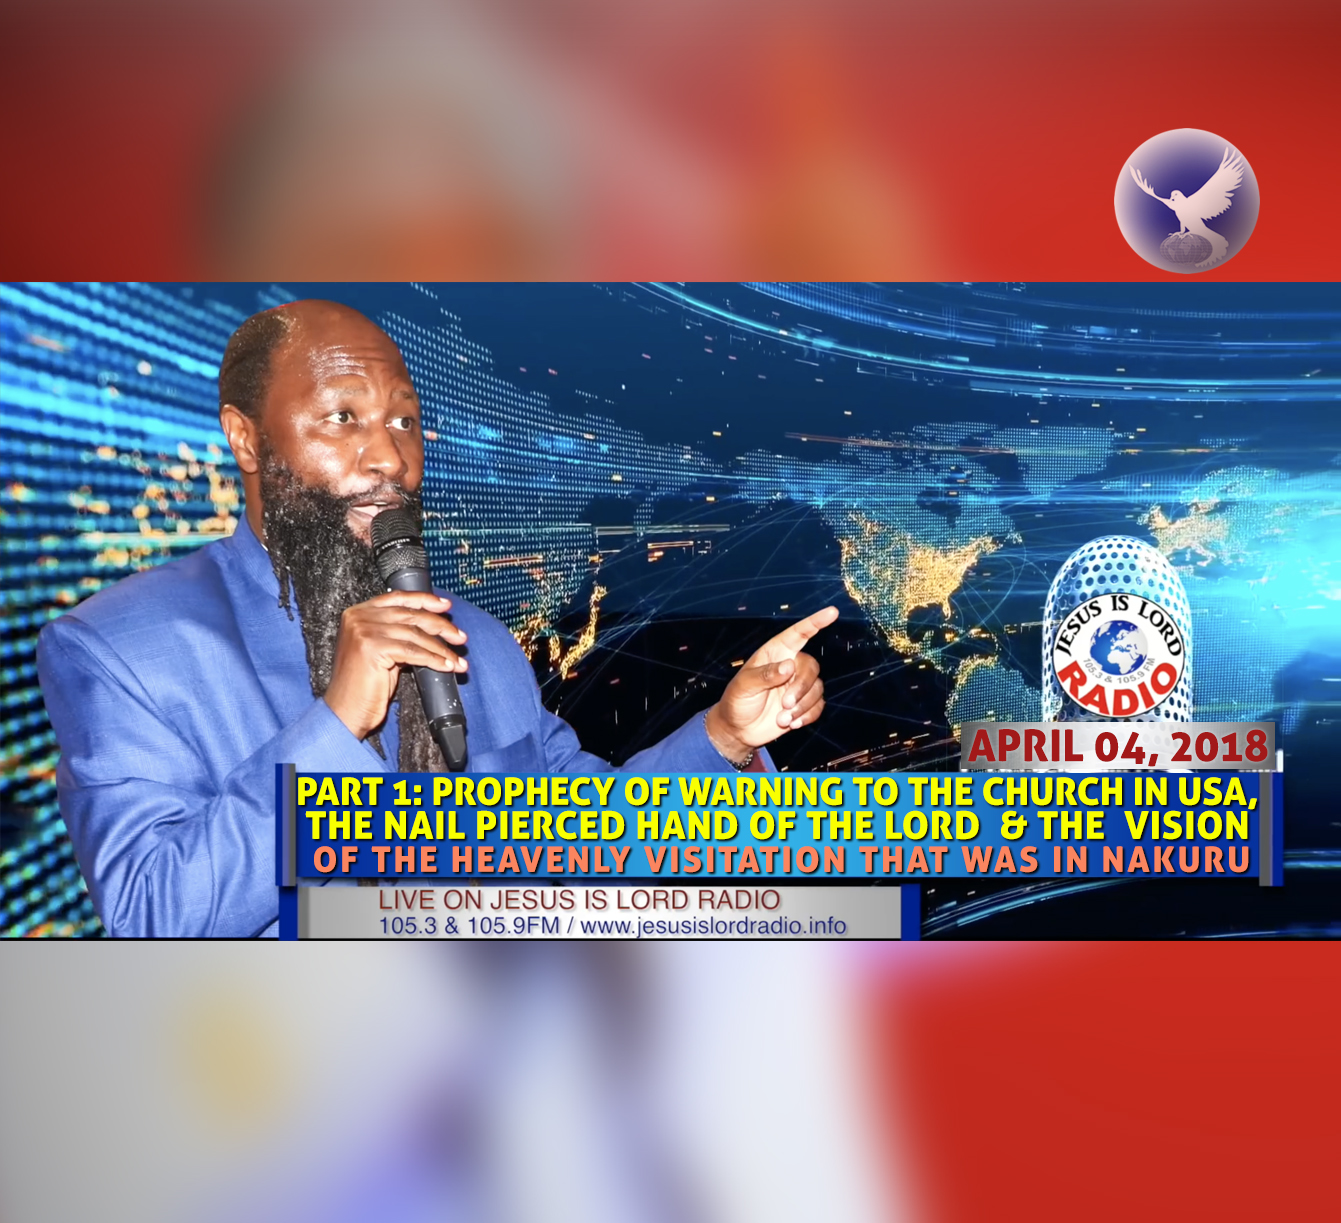 EPISODE 169 - PART 1: PROPHECY OF WARNING TO THE CHURCH IN USA, THE NAIL PIERCED HAND OF THE LORD & VISION OF THE HEAVENLY VISITATION THAT WAS IN NAKURU (08APR2018) - PROPHET DR. OWUOR